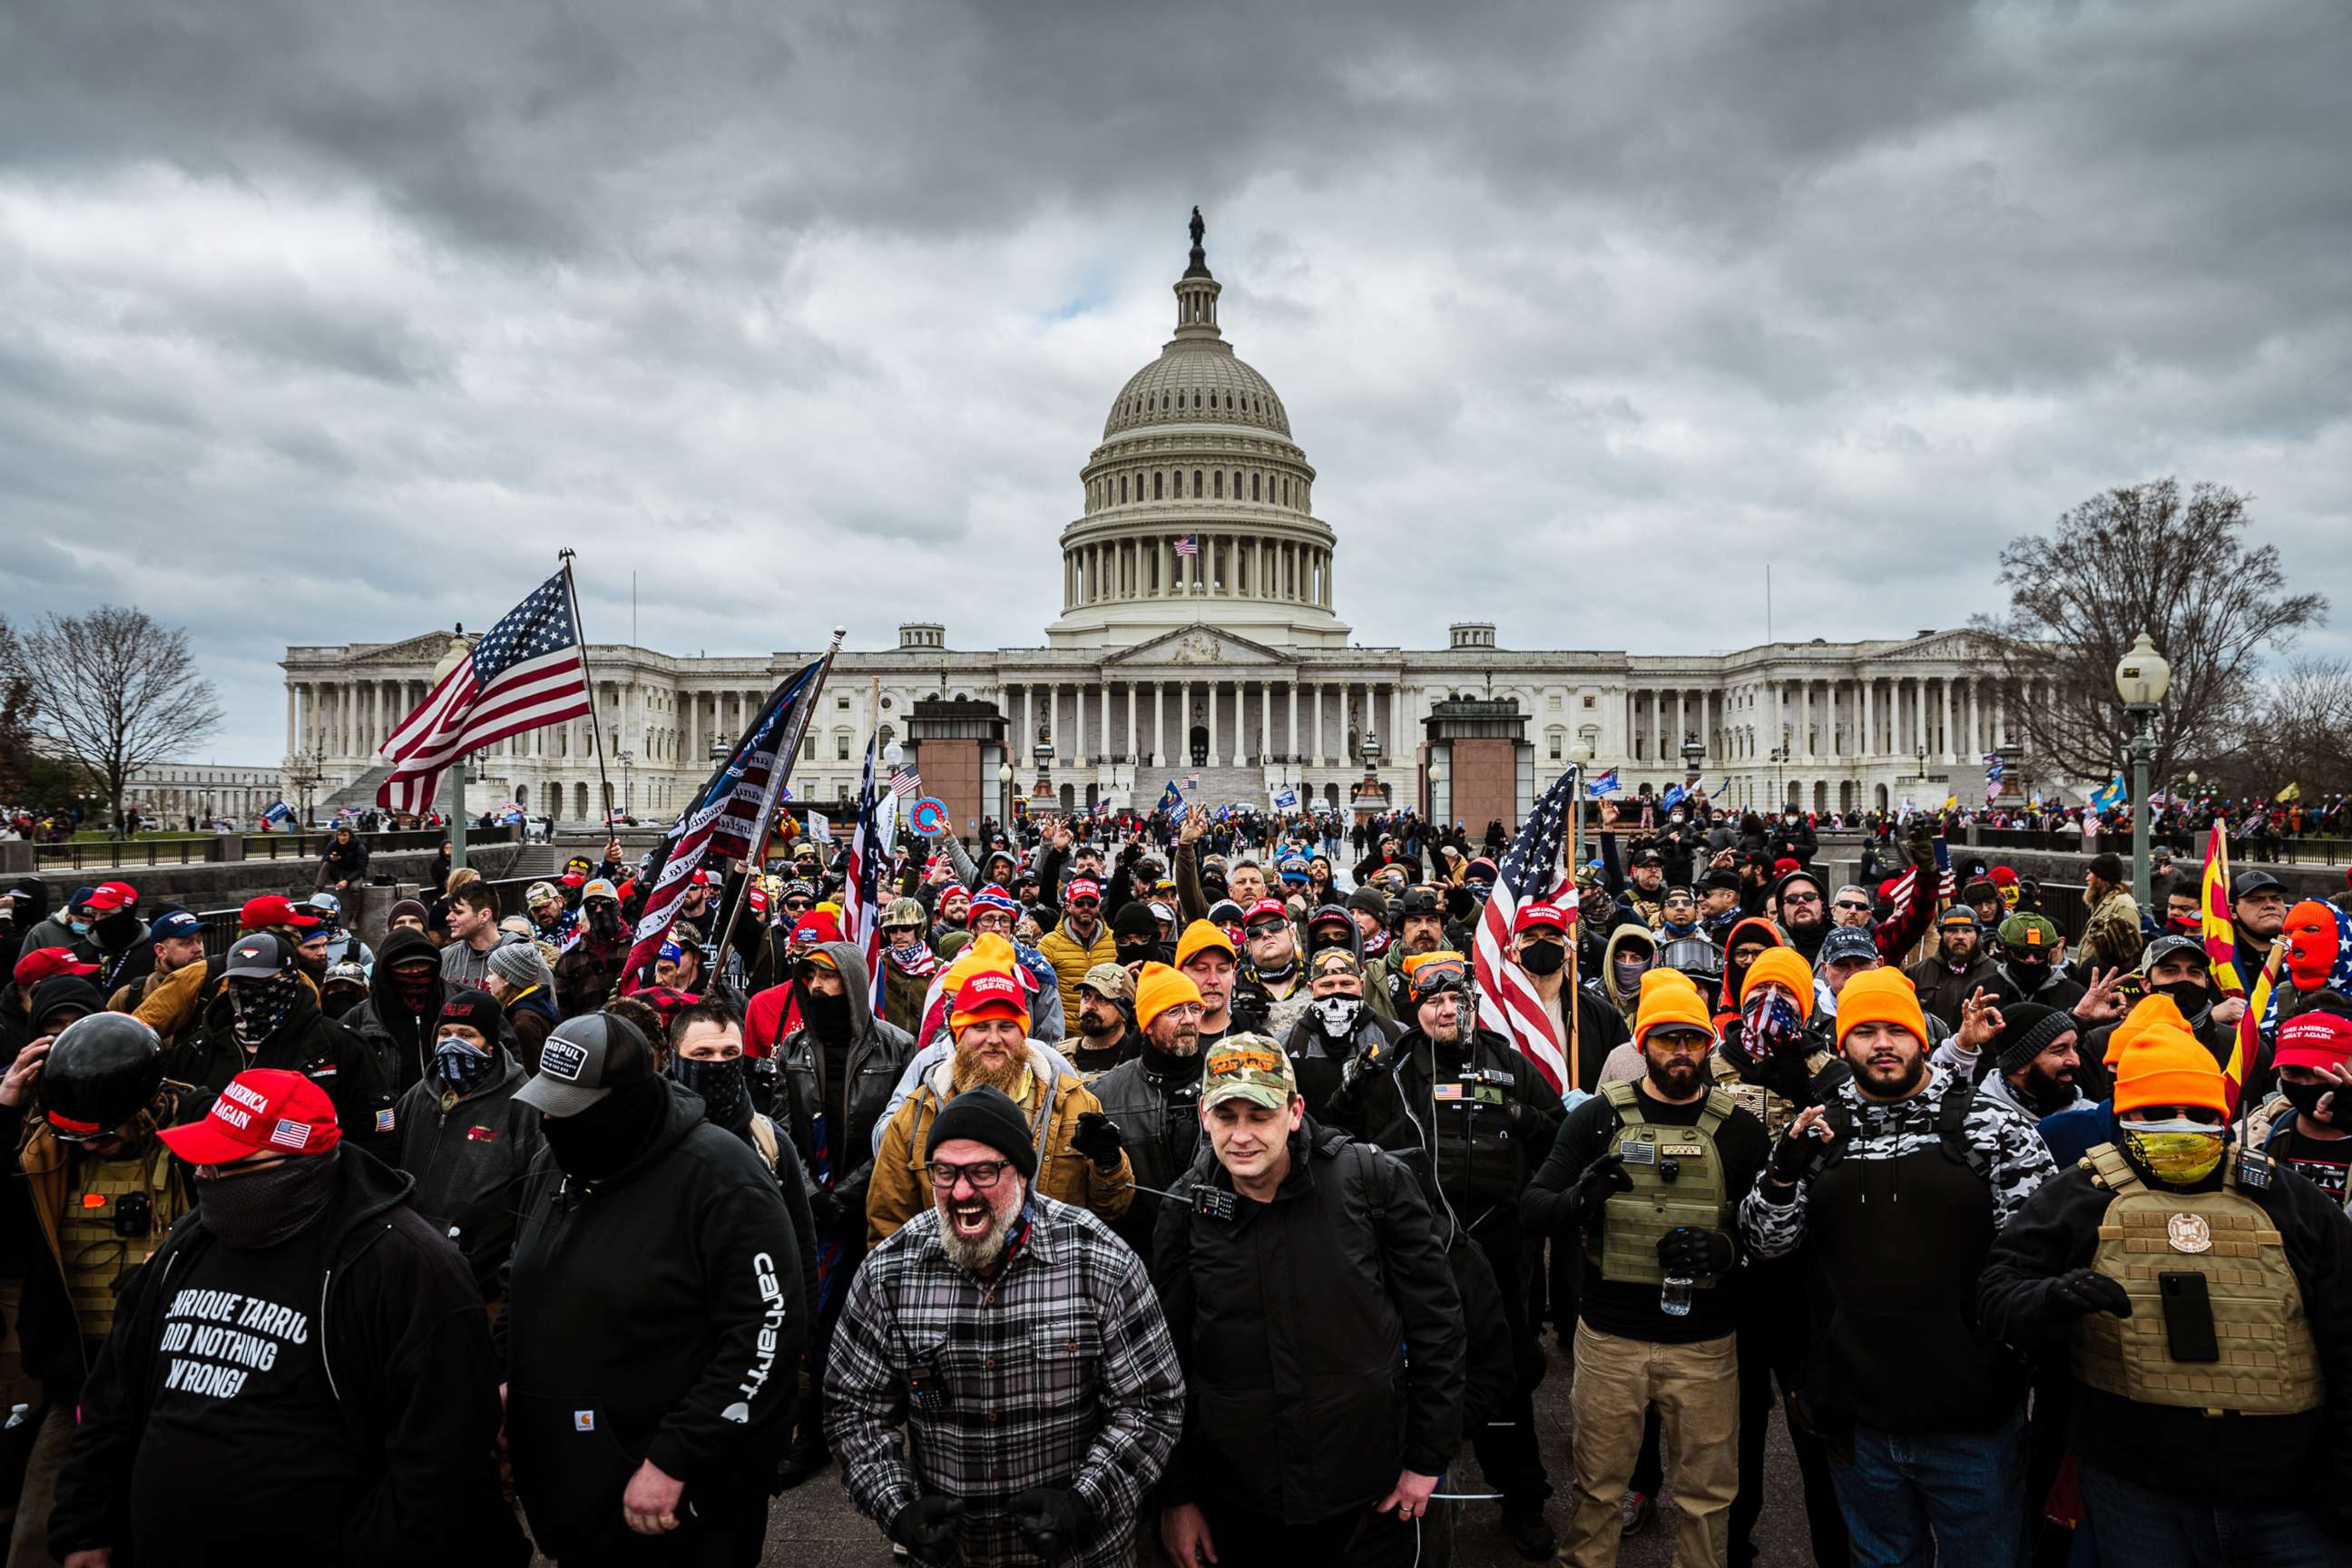 PHOTO: Pro-Trump protesters including Joseph Biggs (plaid shirt) gather in front of the Capitol Building, Jan. 6, 2021, in Washington, D.C.